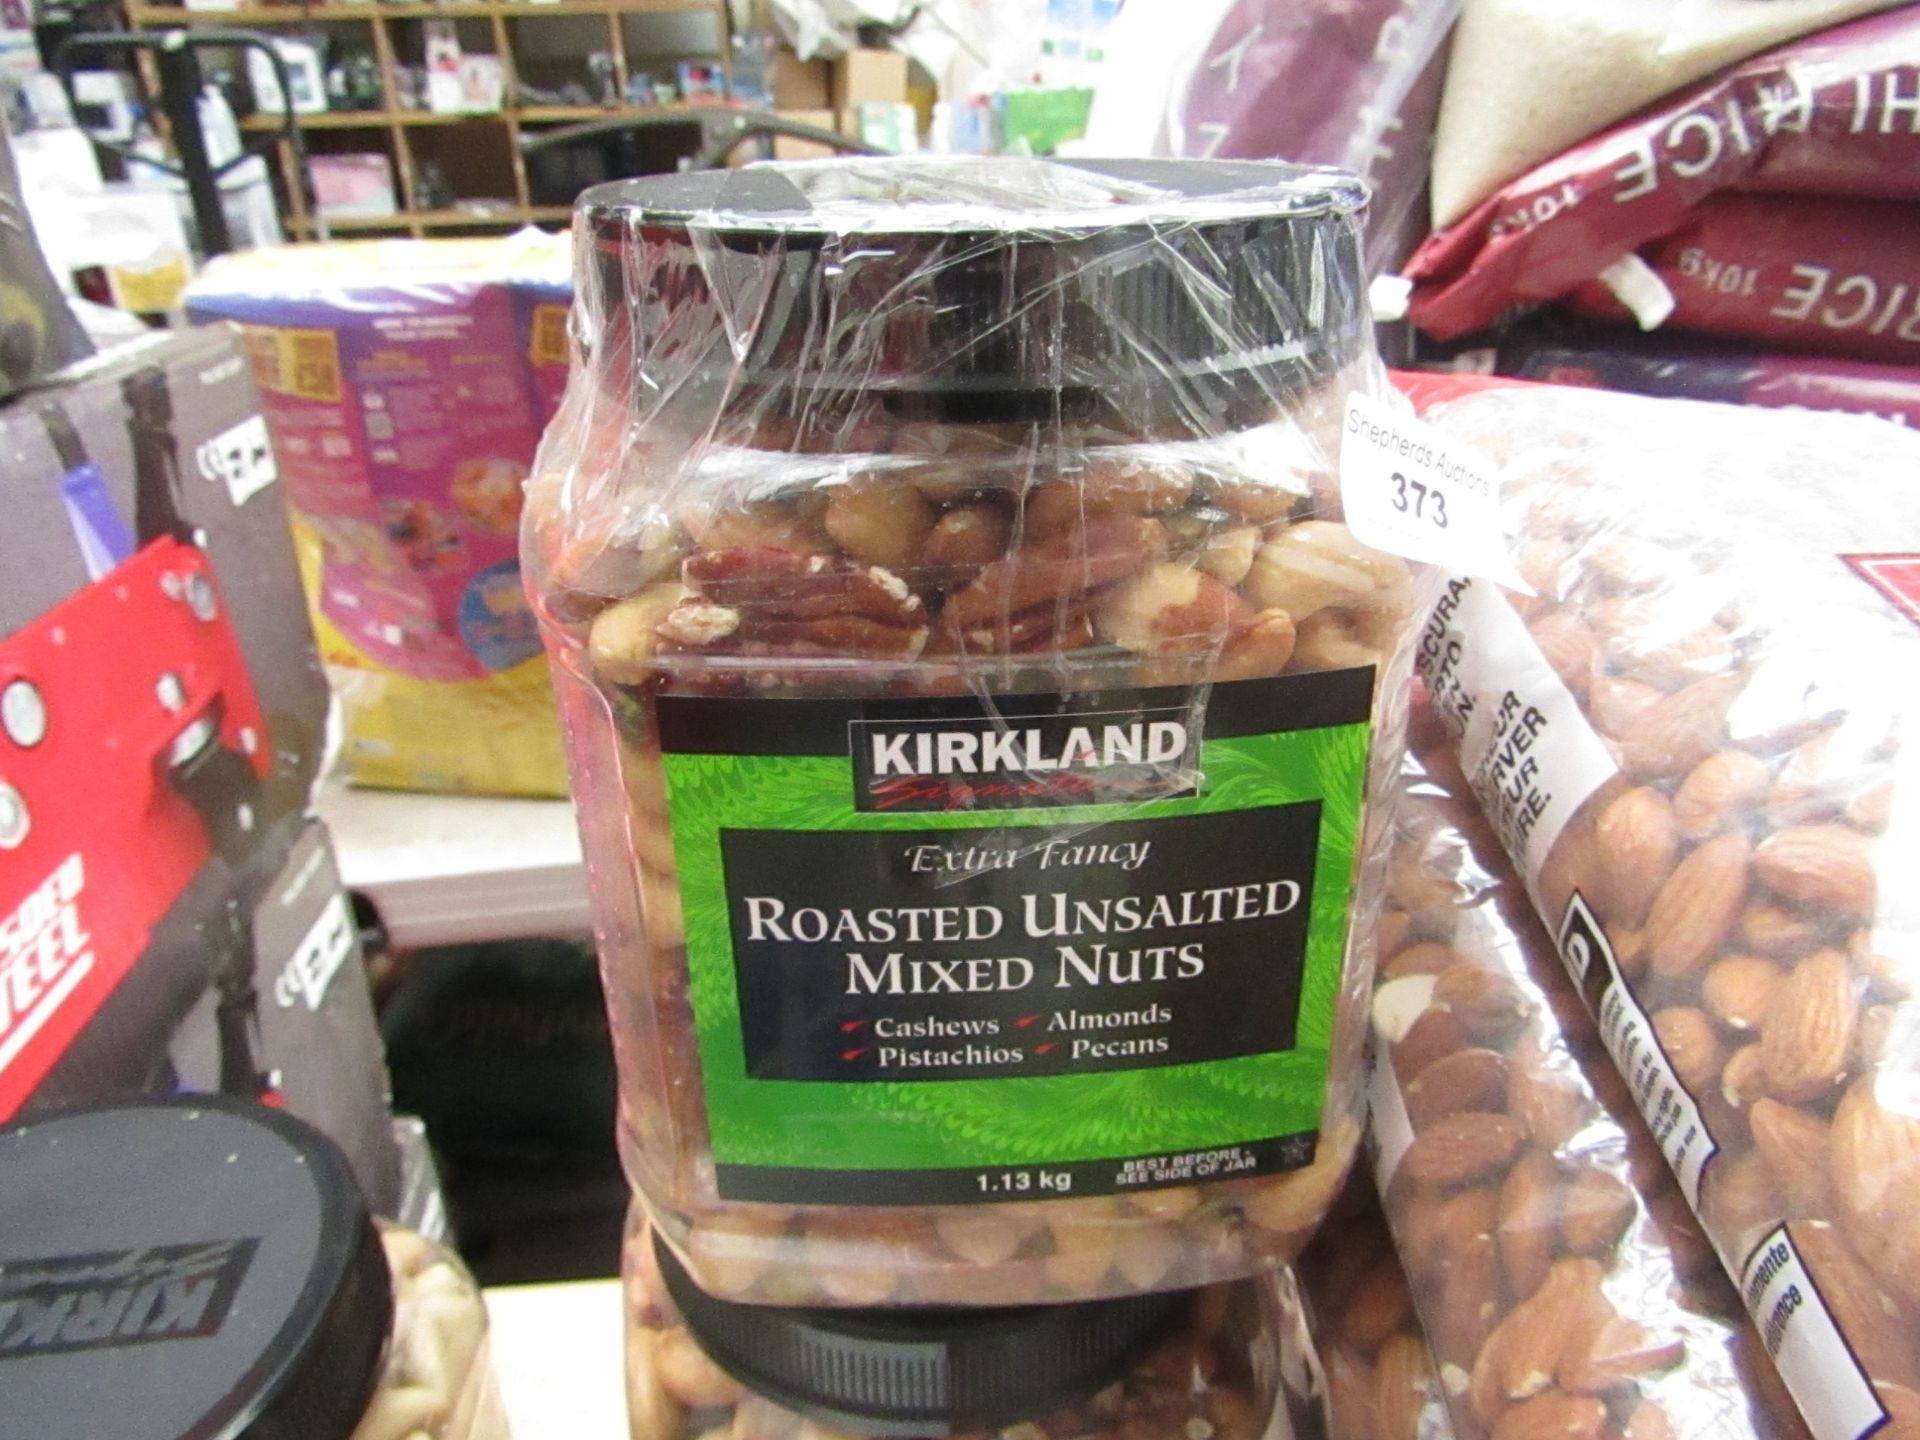 Kirkland 1.13kg Roasted Unsalted Mixed Nuts. Tub has split but has been repaired. BB 11/12/20